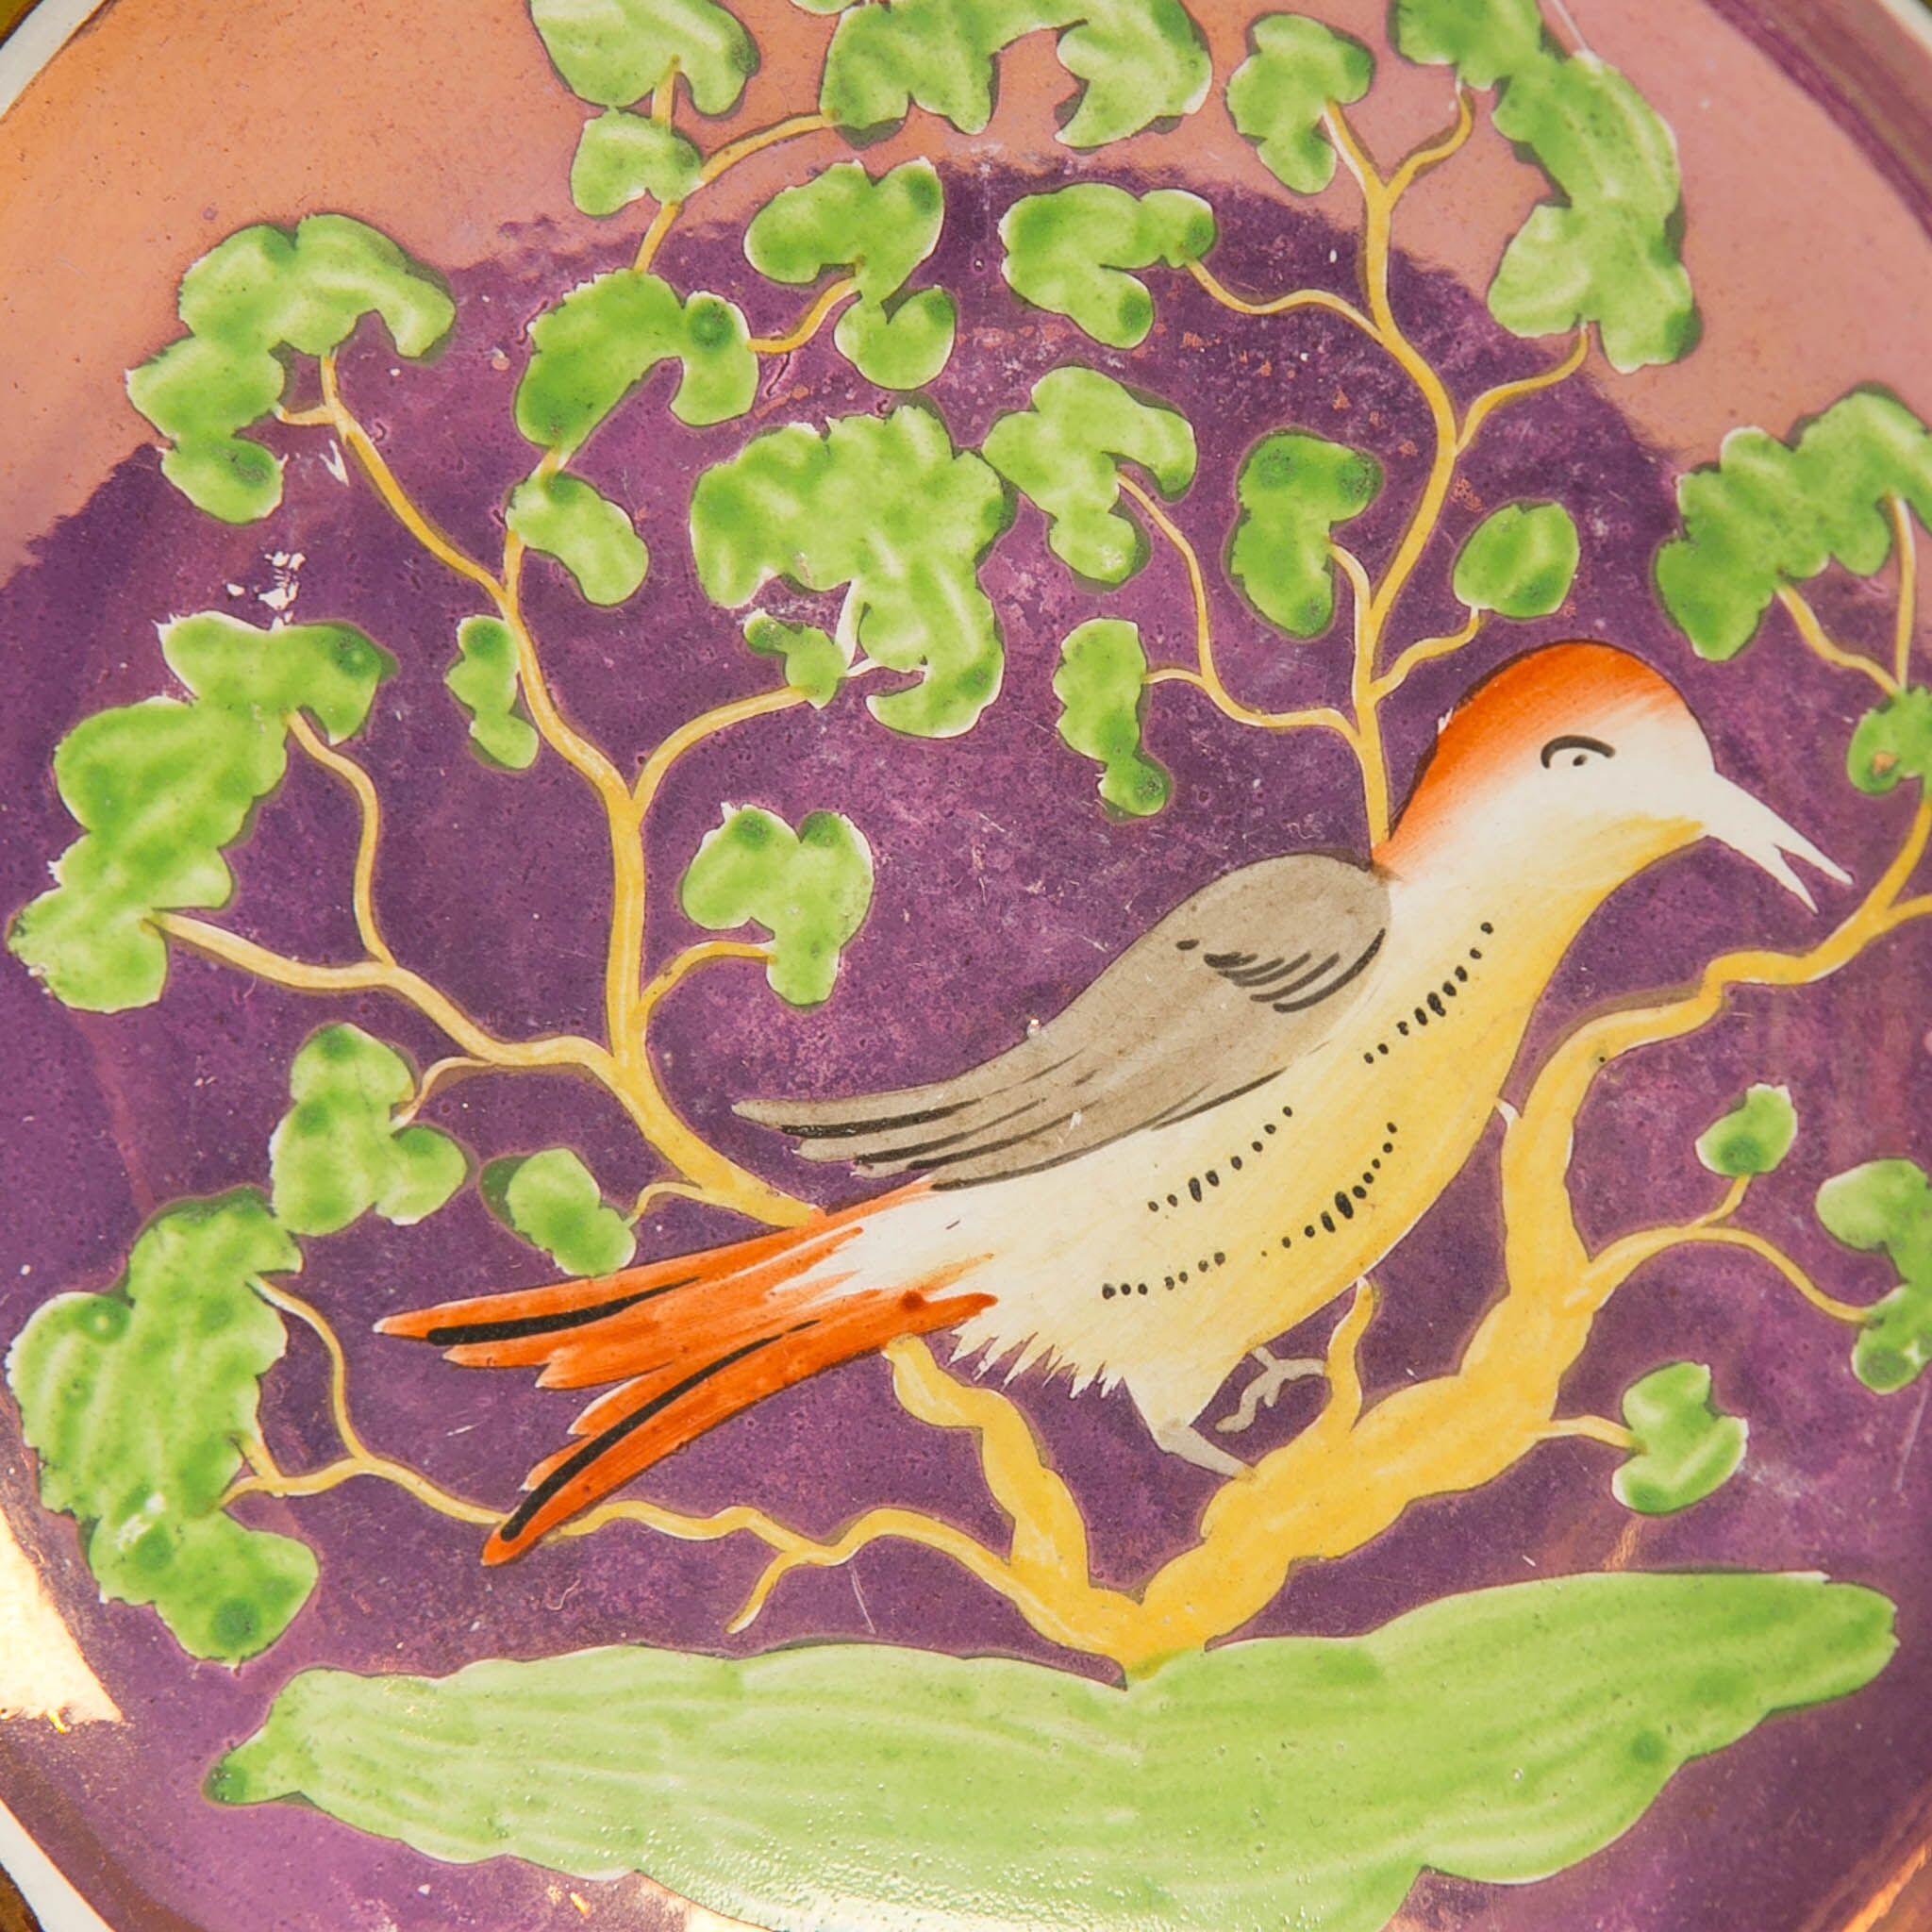 We are pleased to offer this very special lustreware cup and saucer made in England, circa 1830. The cup and saucer both show a hand painted songbird perched in a tree with green leaves and grass on a purple ground. The colors purple and green are